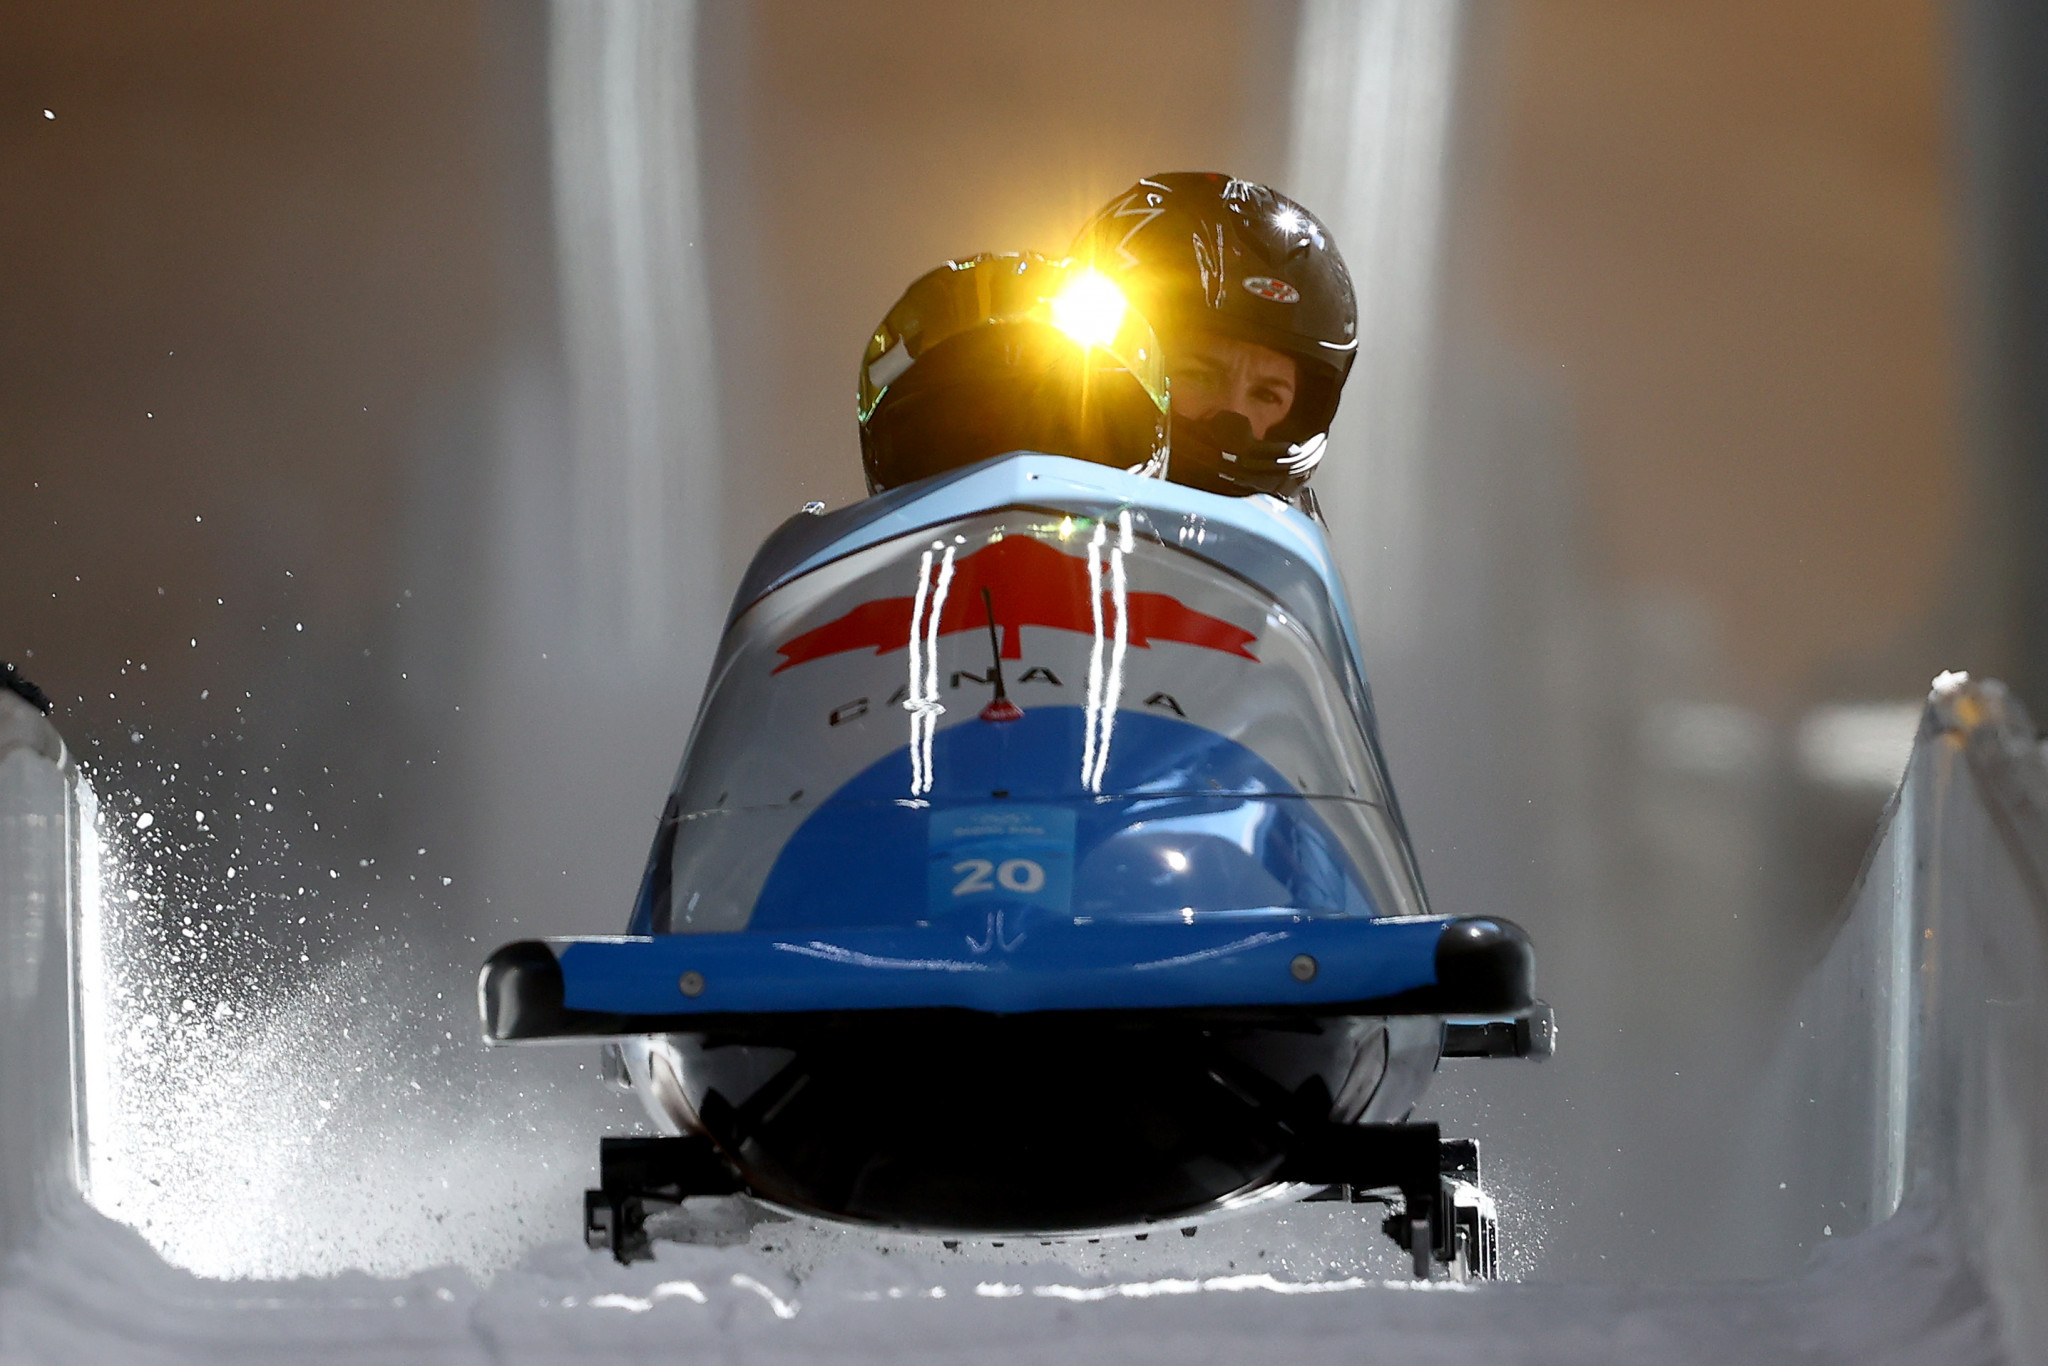 McNeil new Bobsleigh Canada Skeleton leader as Storey does not seek re-election